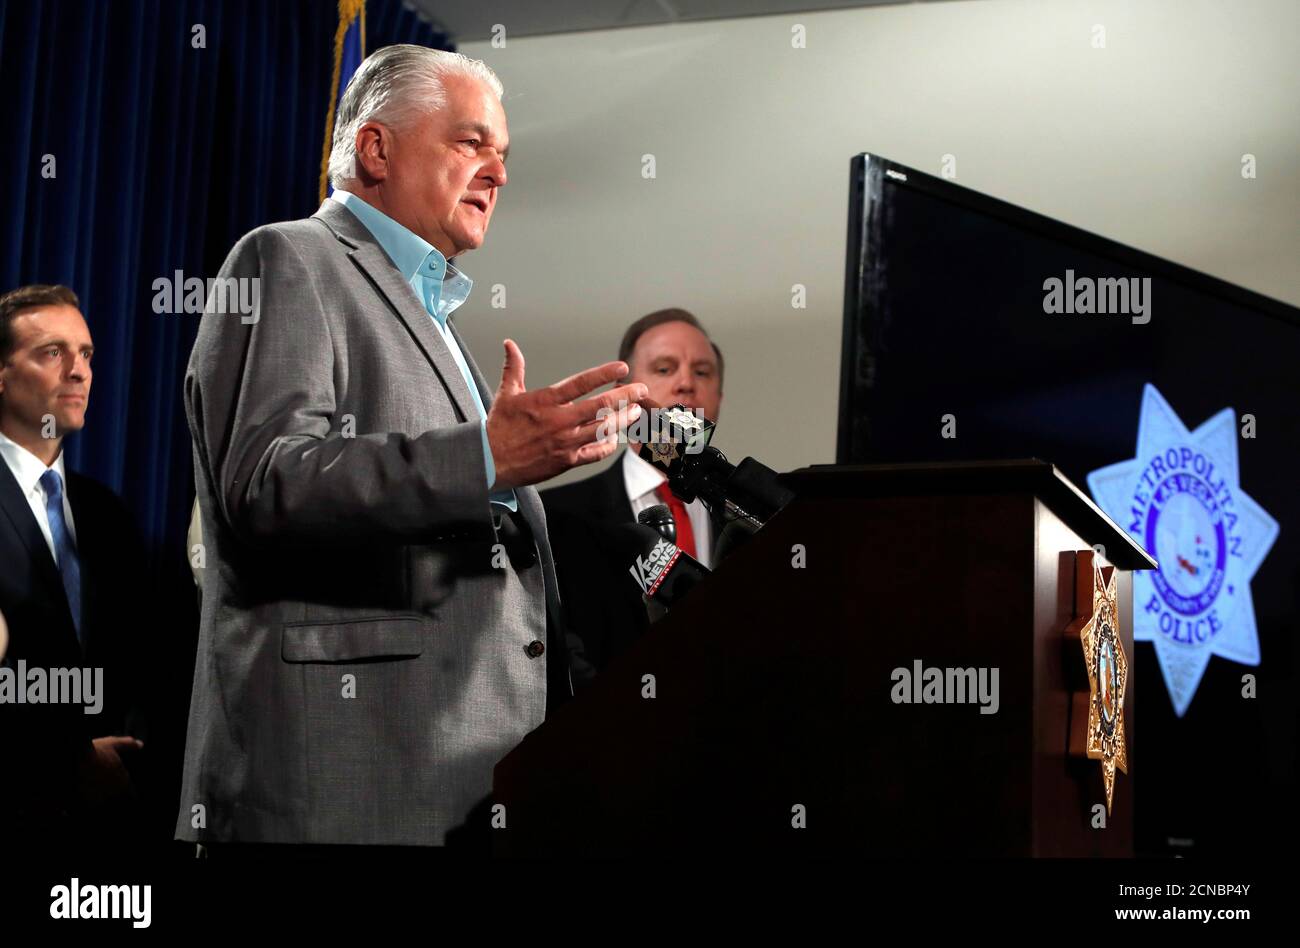 Clark County Commission Chairman Steve Sisolak reports on donations to a victims fund, including a $3 million donation from MGM Resorts International, during a media briefing at the Las Vegas Metro Police headquarters in Las Vegas, Nevada, U.S. October 3, 2017.  REUTERS/Las Vegas Sun/Steve Marcus Stock Photo